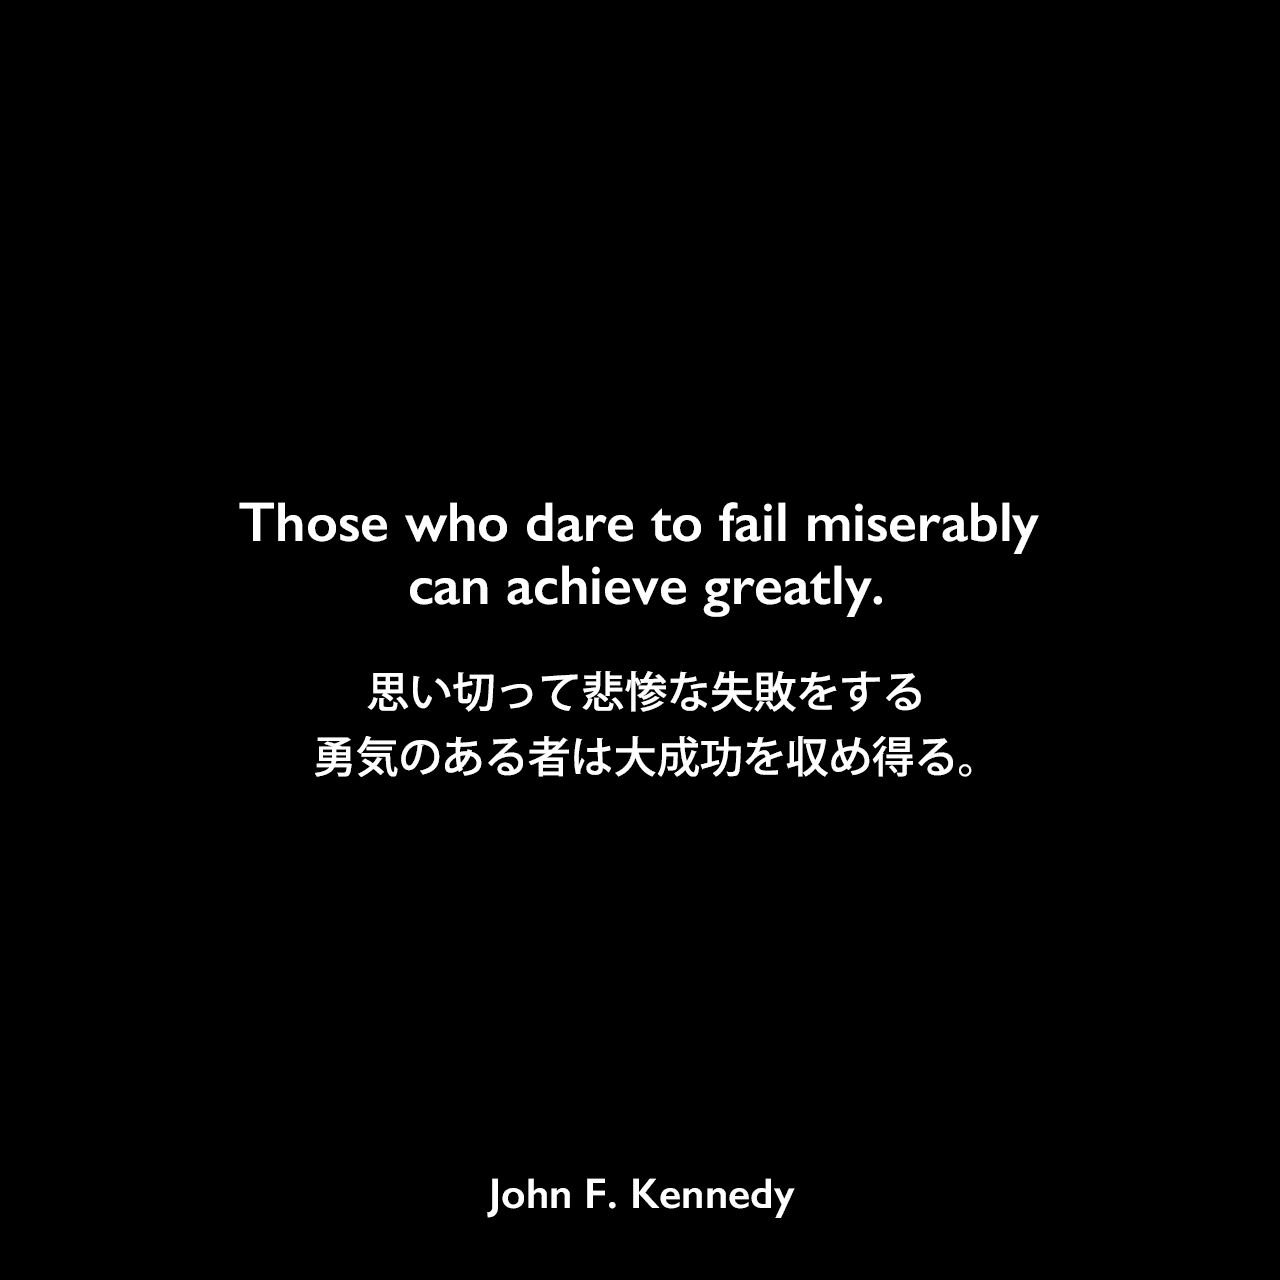 Those who dare to fail miserably can achieve greatly.思い切って悲惨な失敗をする勇気のある者は、大成功を収め得る。John F Kennedy